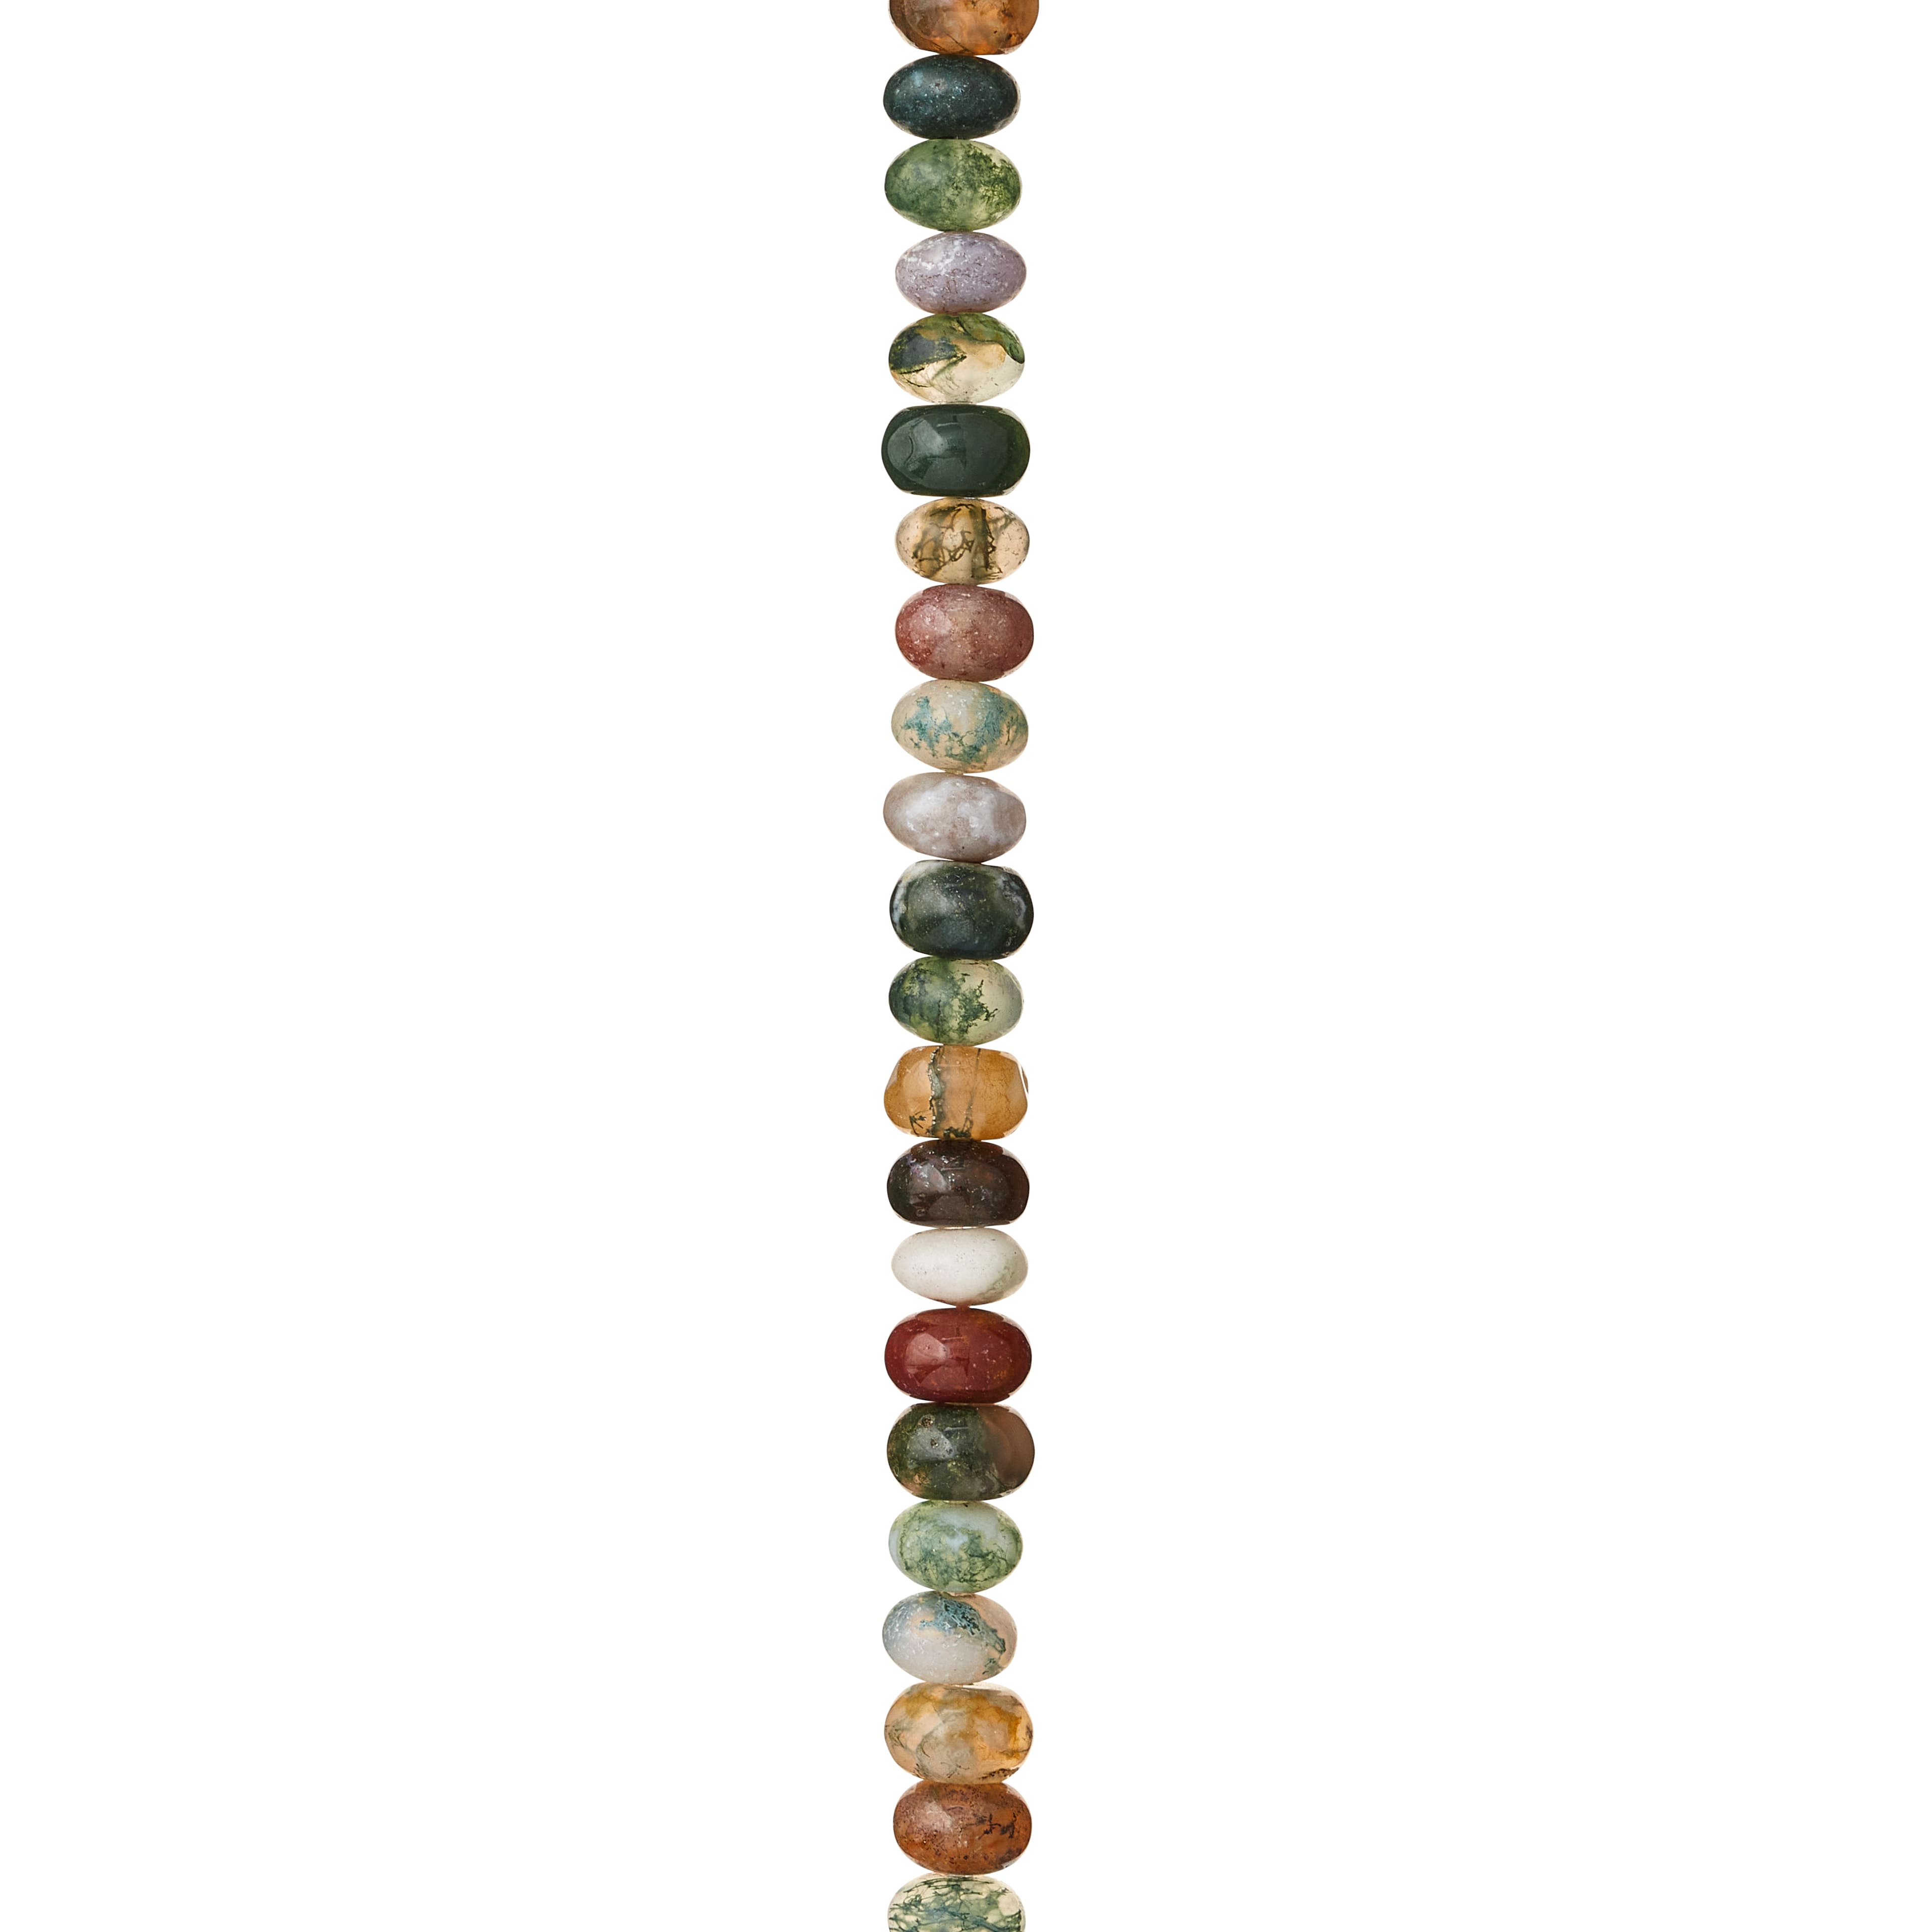 Buy the Multicolored Strung Beads By Bead Landing™ at Michaels